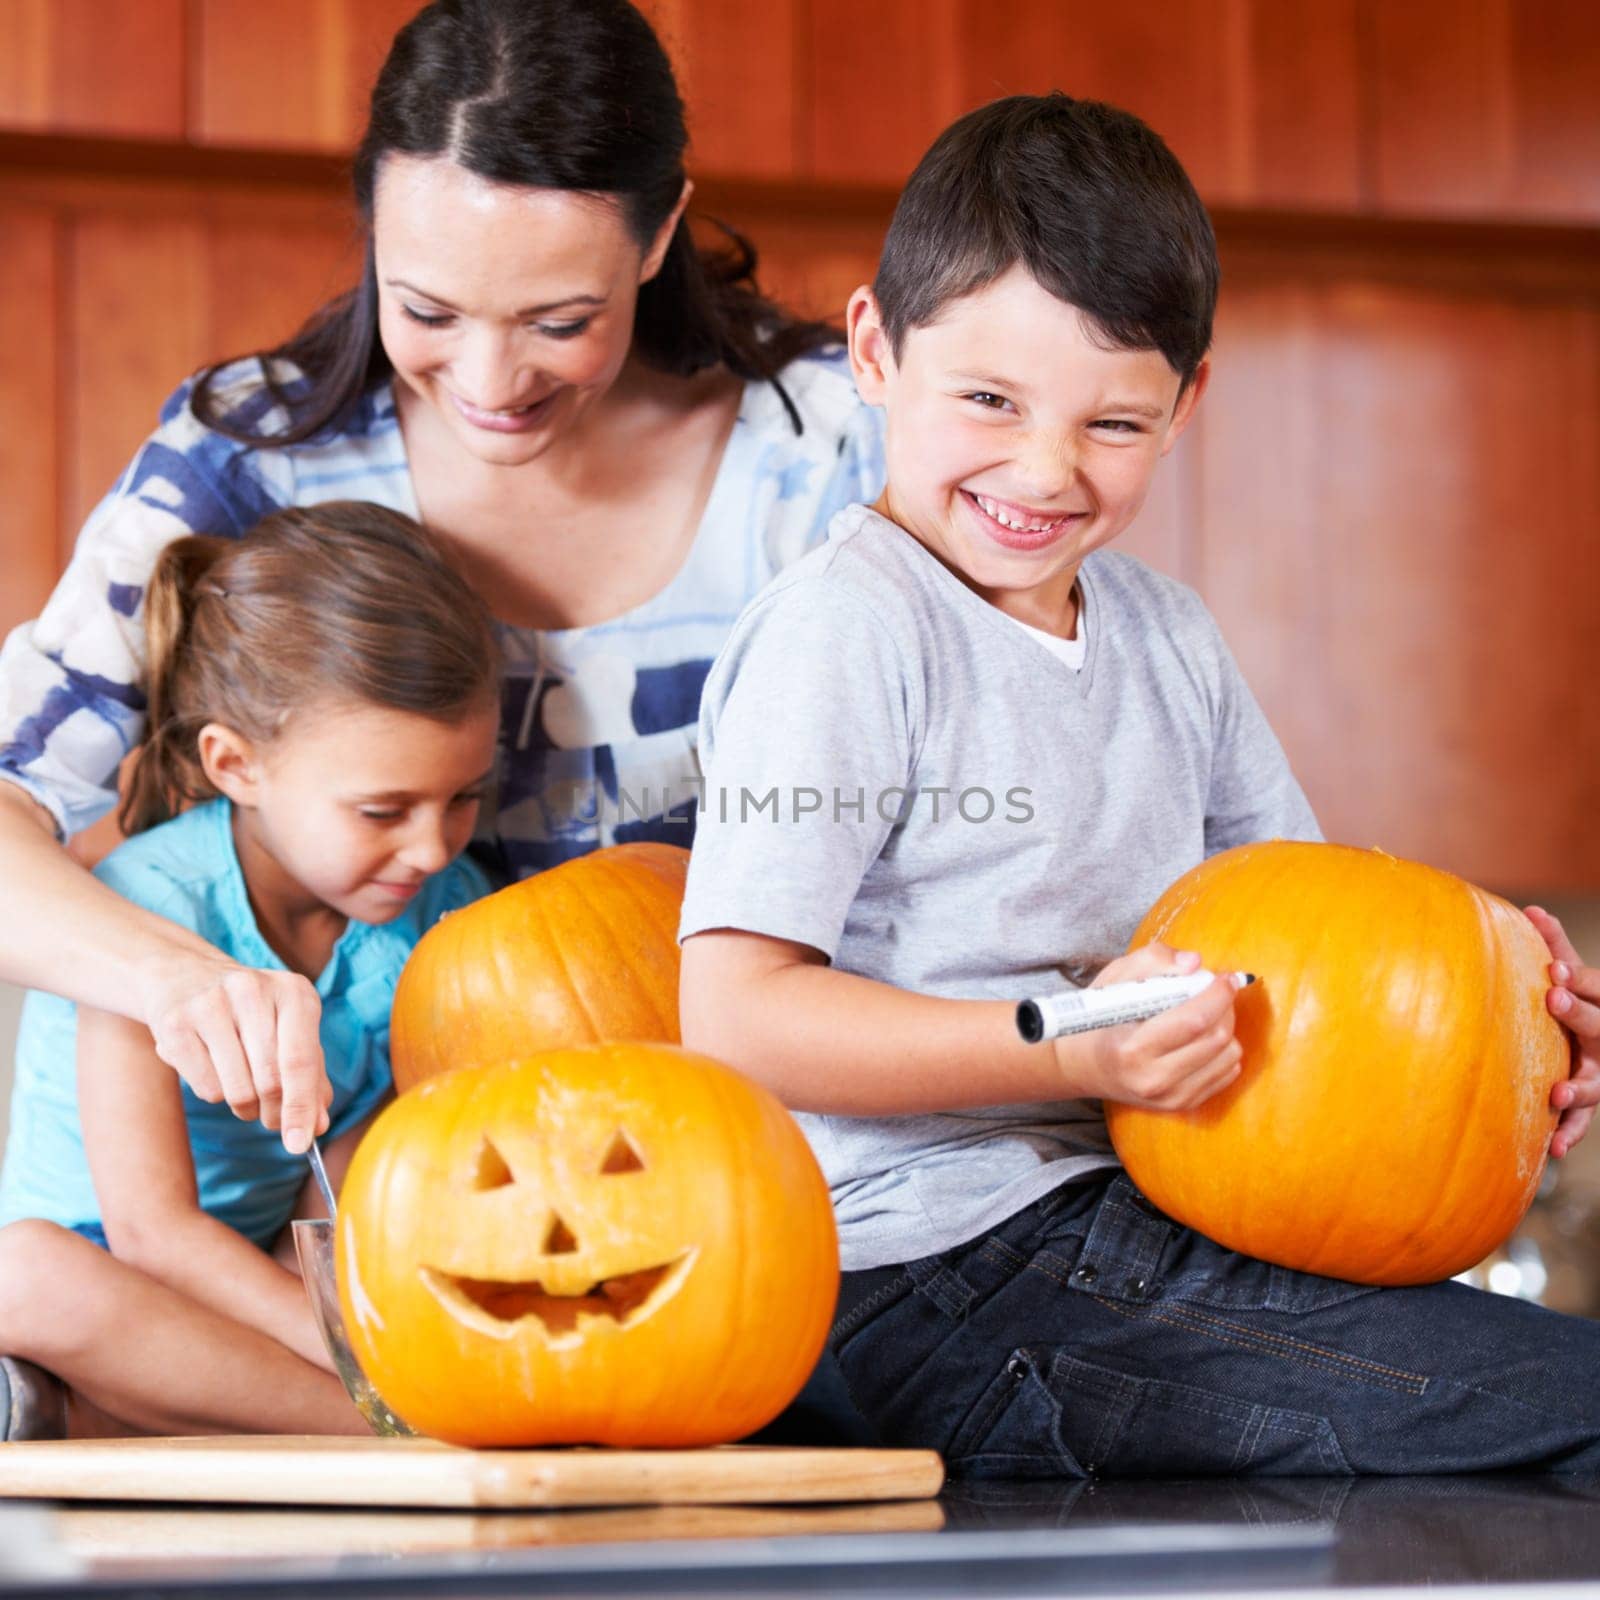 Halloween, pumpkin and a family in the kitchen of their home together for holiday celebration. Creative, smile or happy with a mother, son and daughter carving a face into a vegetable for decoration by YuriArcurs